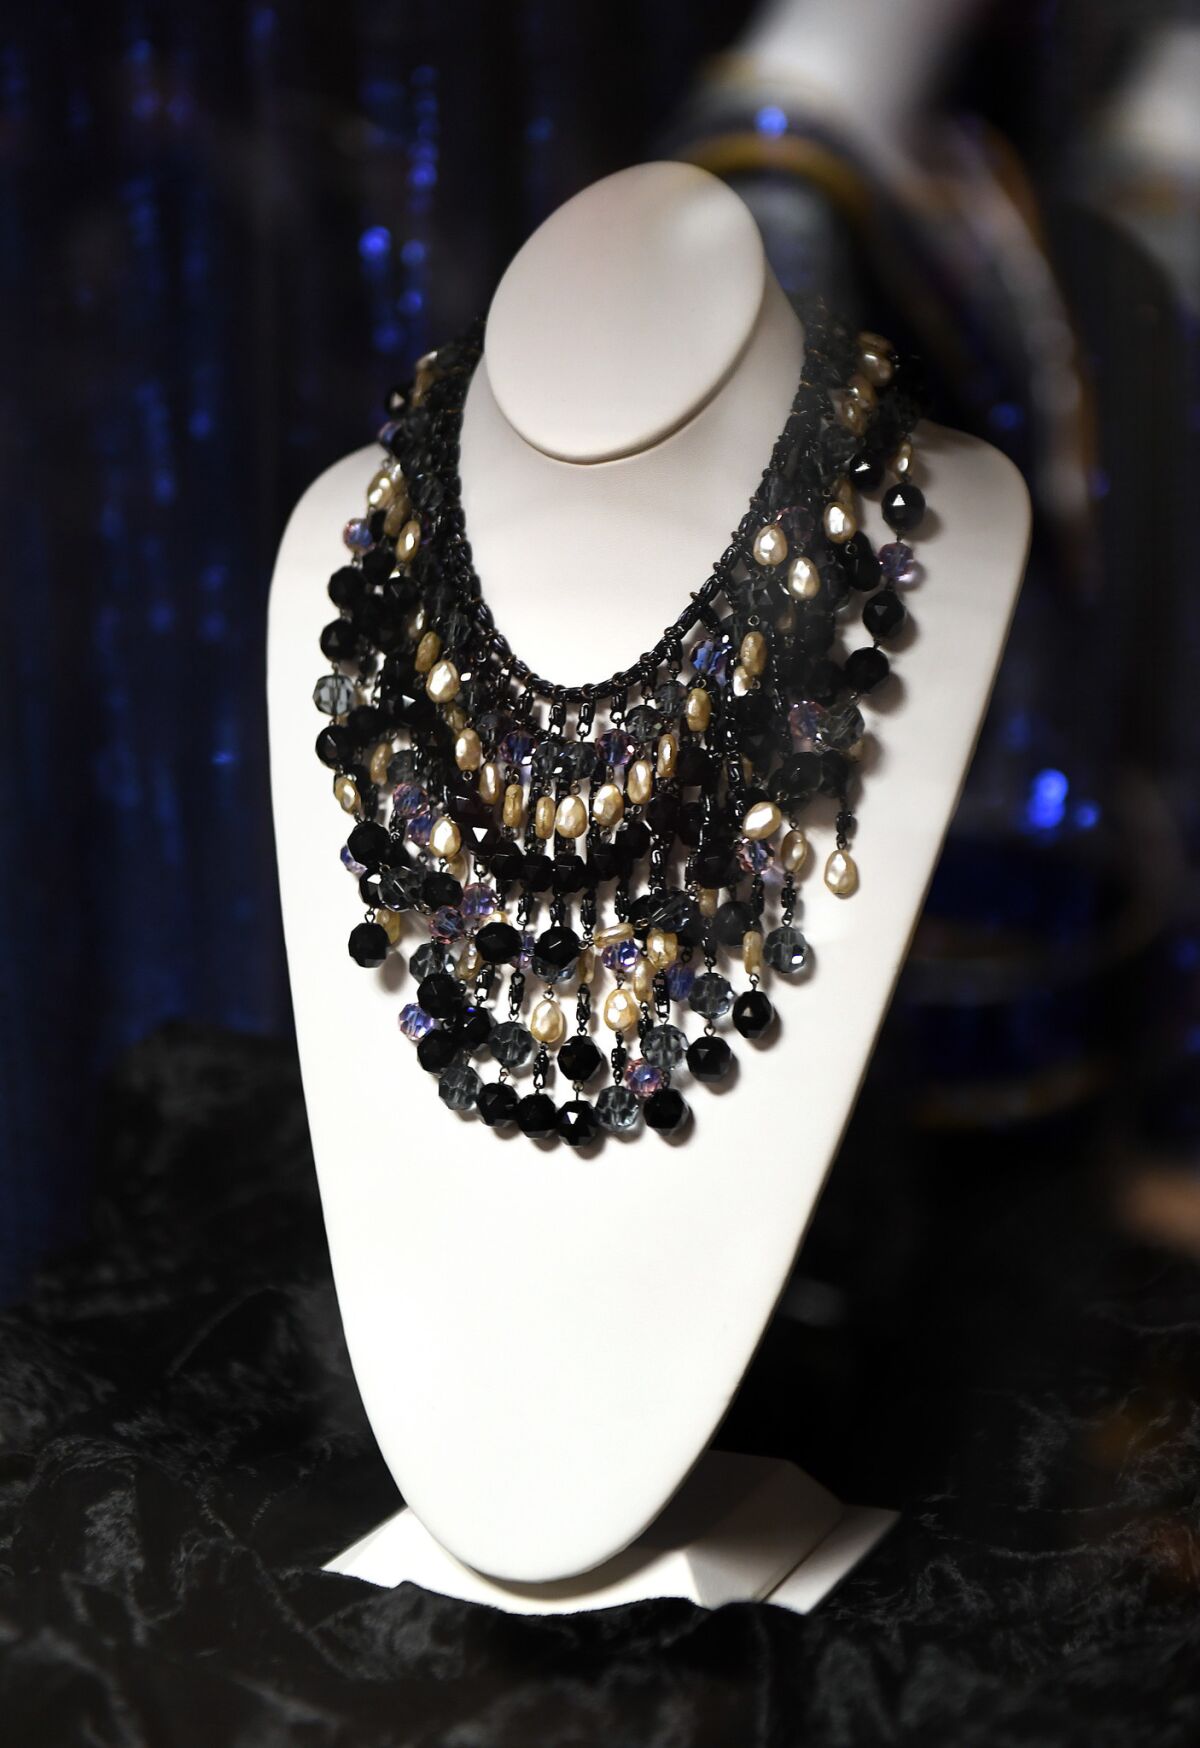 A necklace worn by Audrey Hepburn in "Breakfast at Tiffany's" is displayed in the Paramount archives.